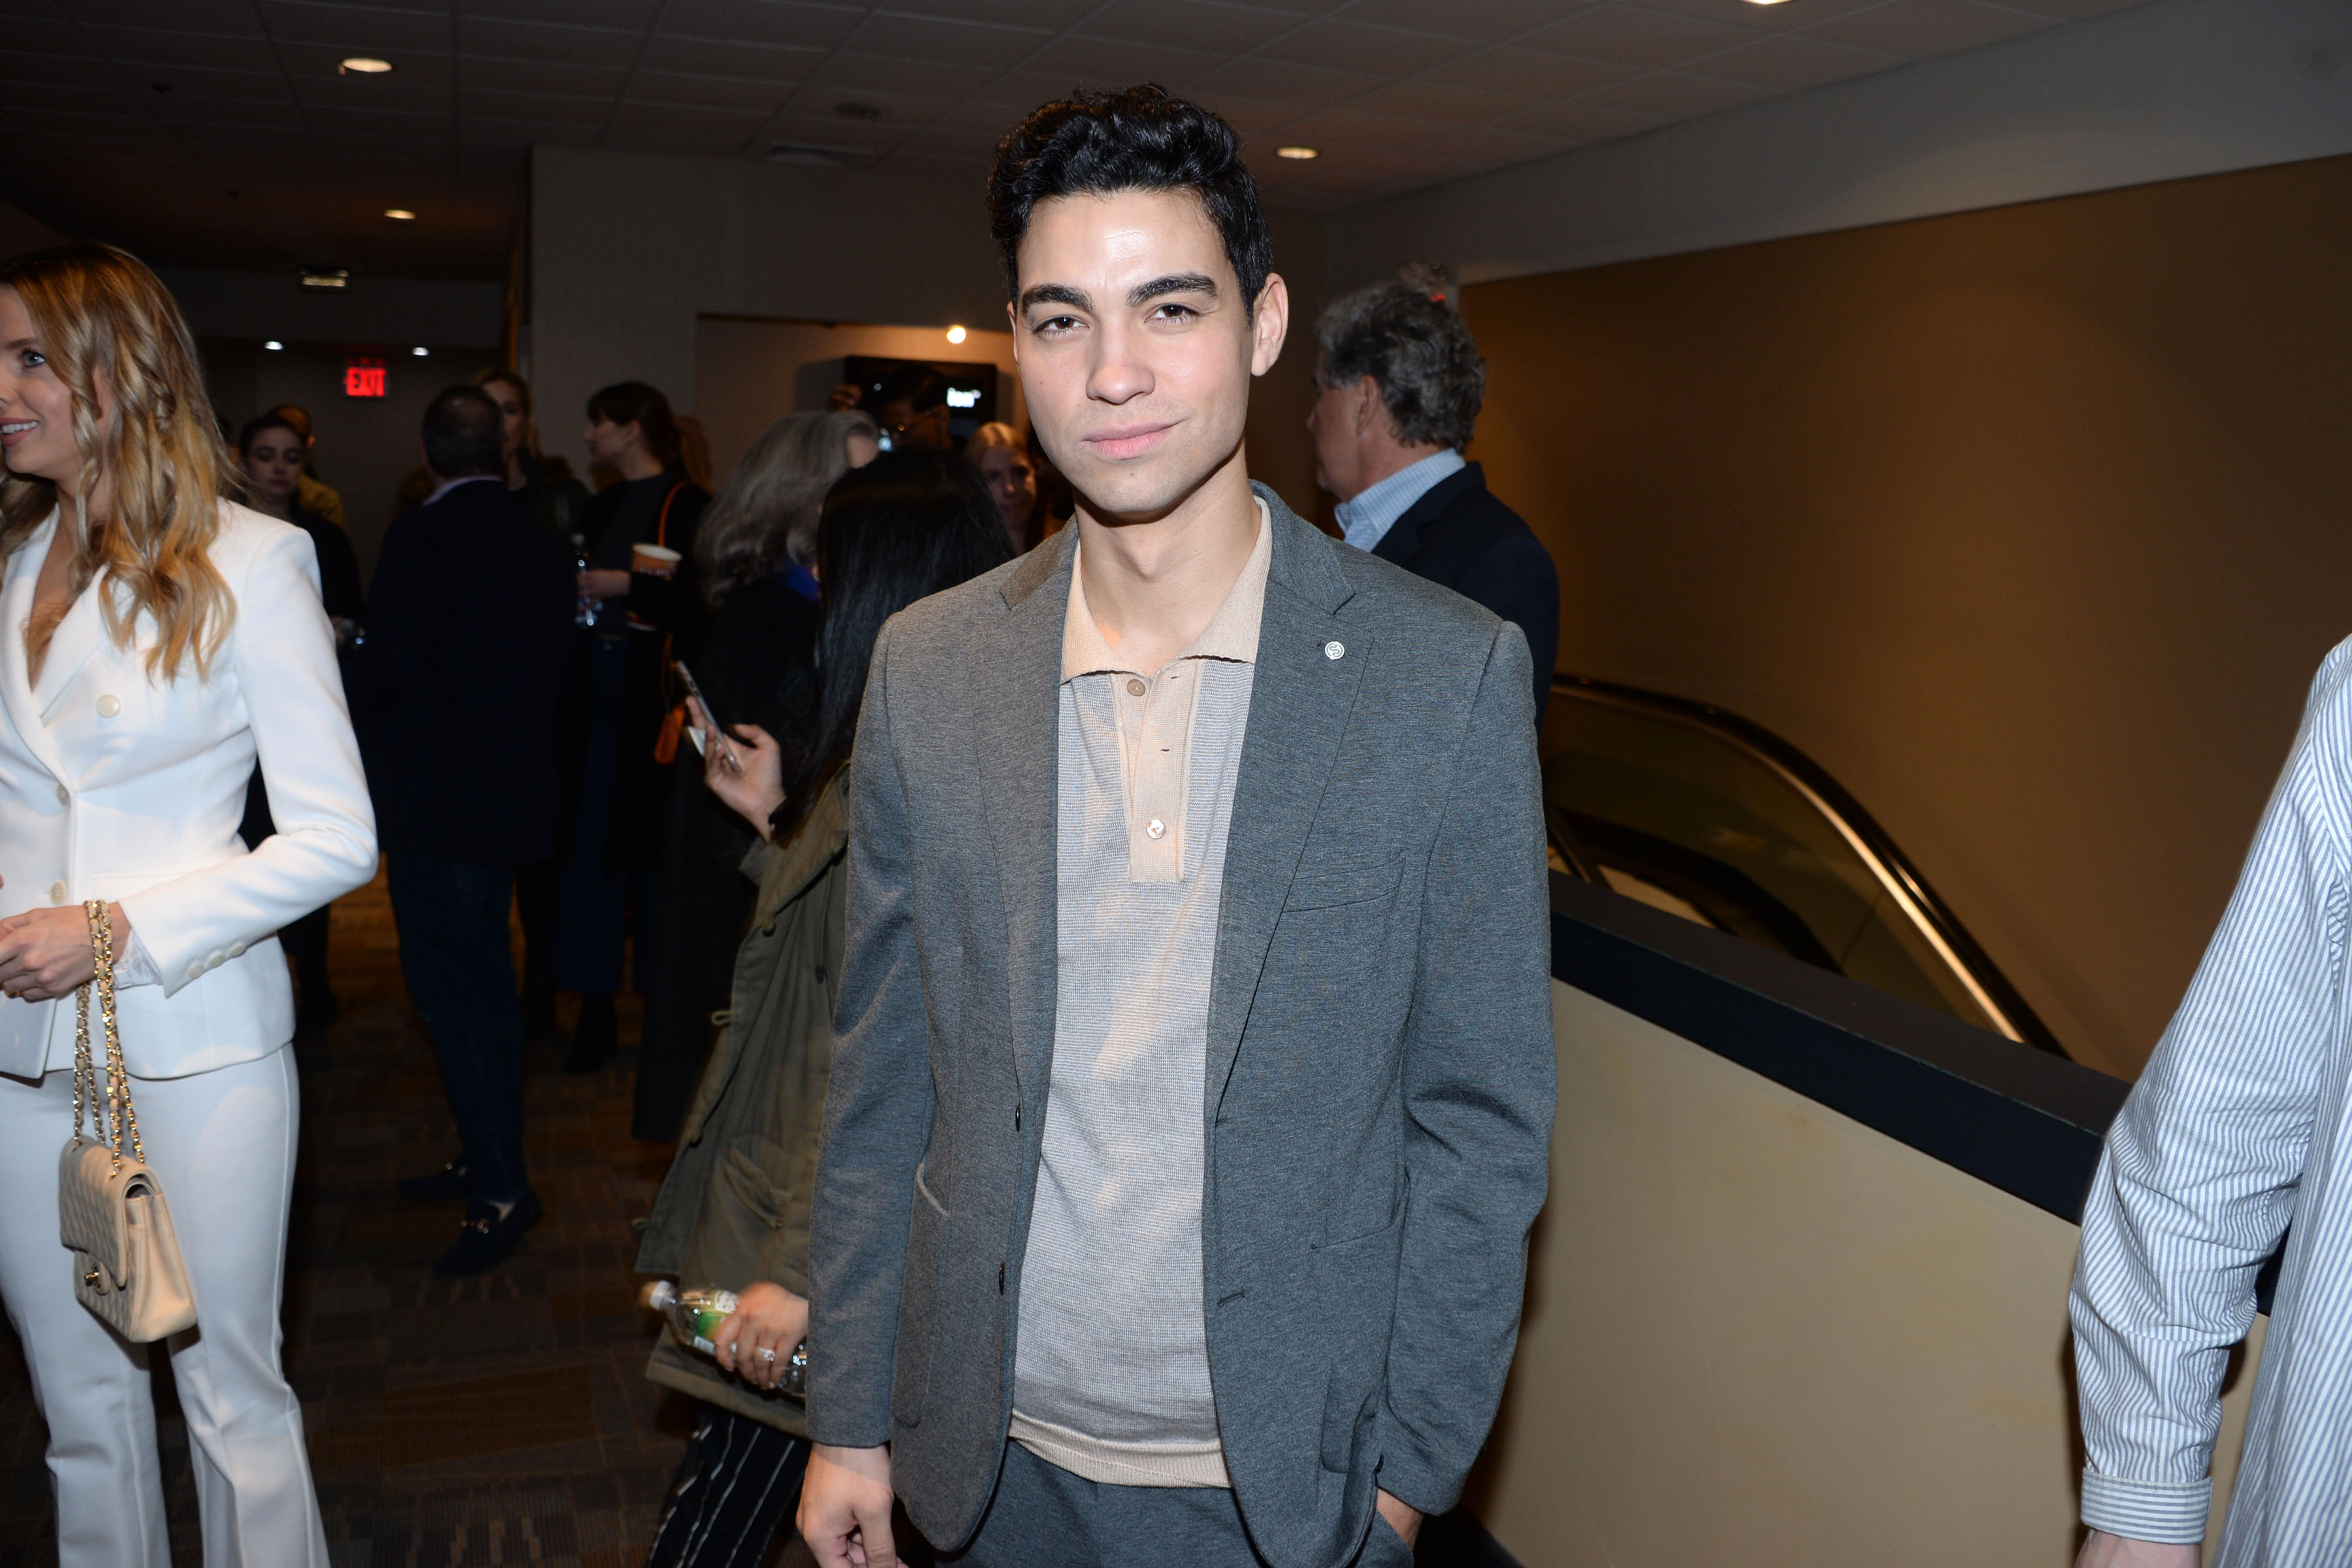 Davi Santos attends The Cinema Society & Monkey 47 Host A Special Screening Of Sony Pictures Classics' "Greed" at Cinepolis Chelsea on February 24, 2020 in New York City 